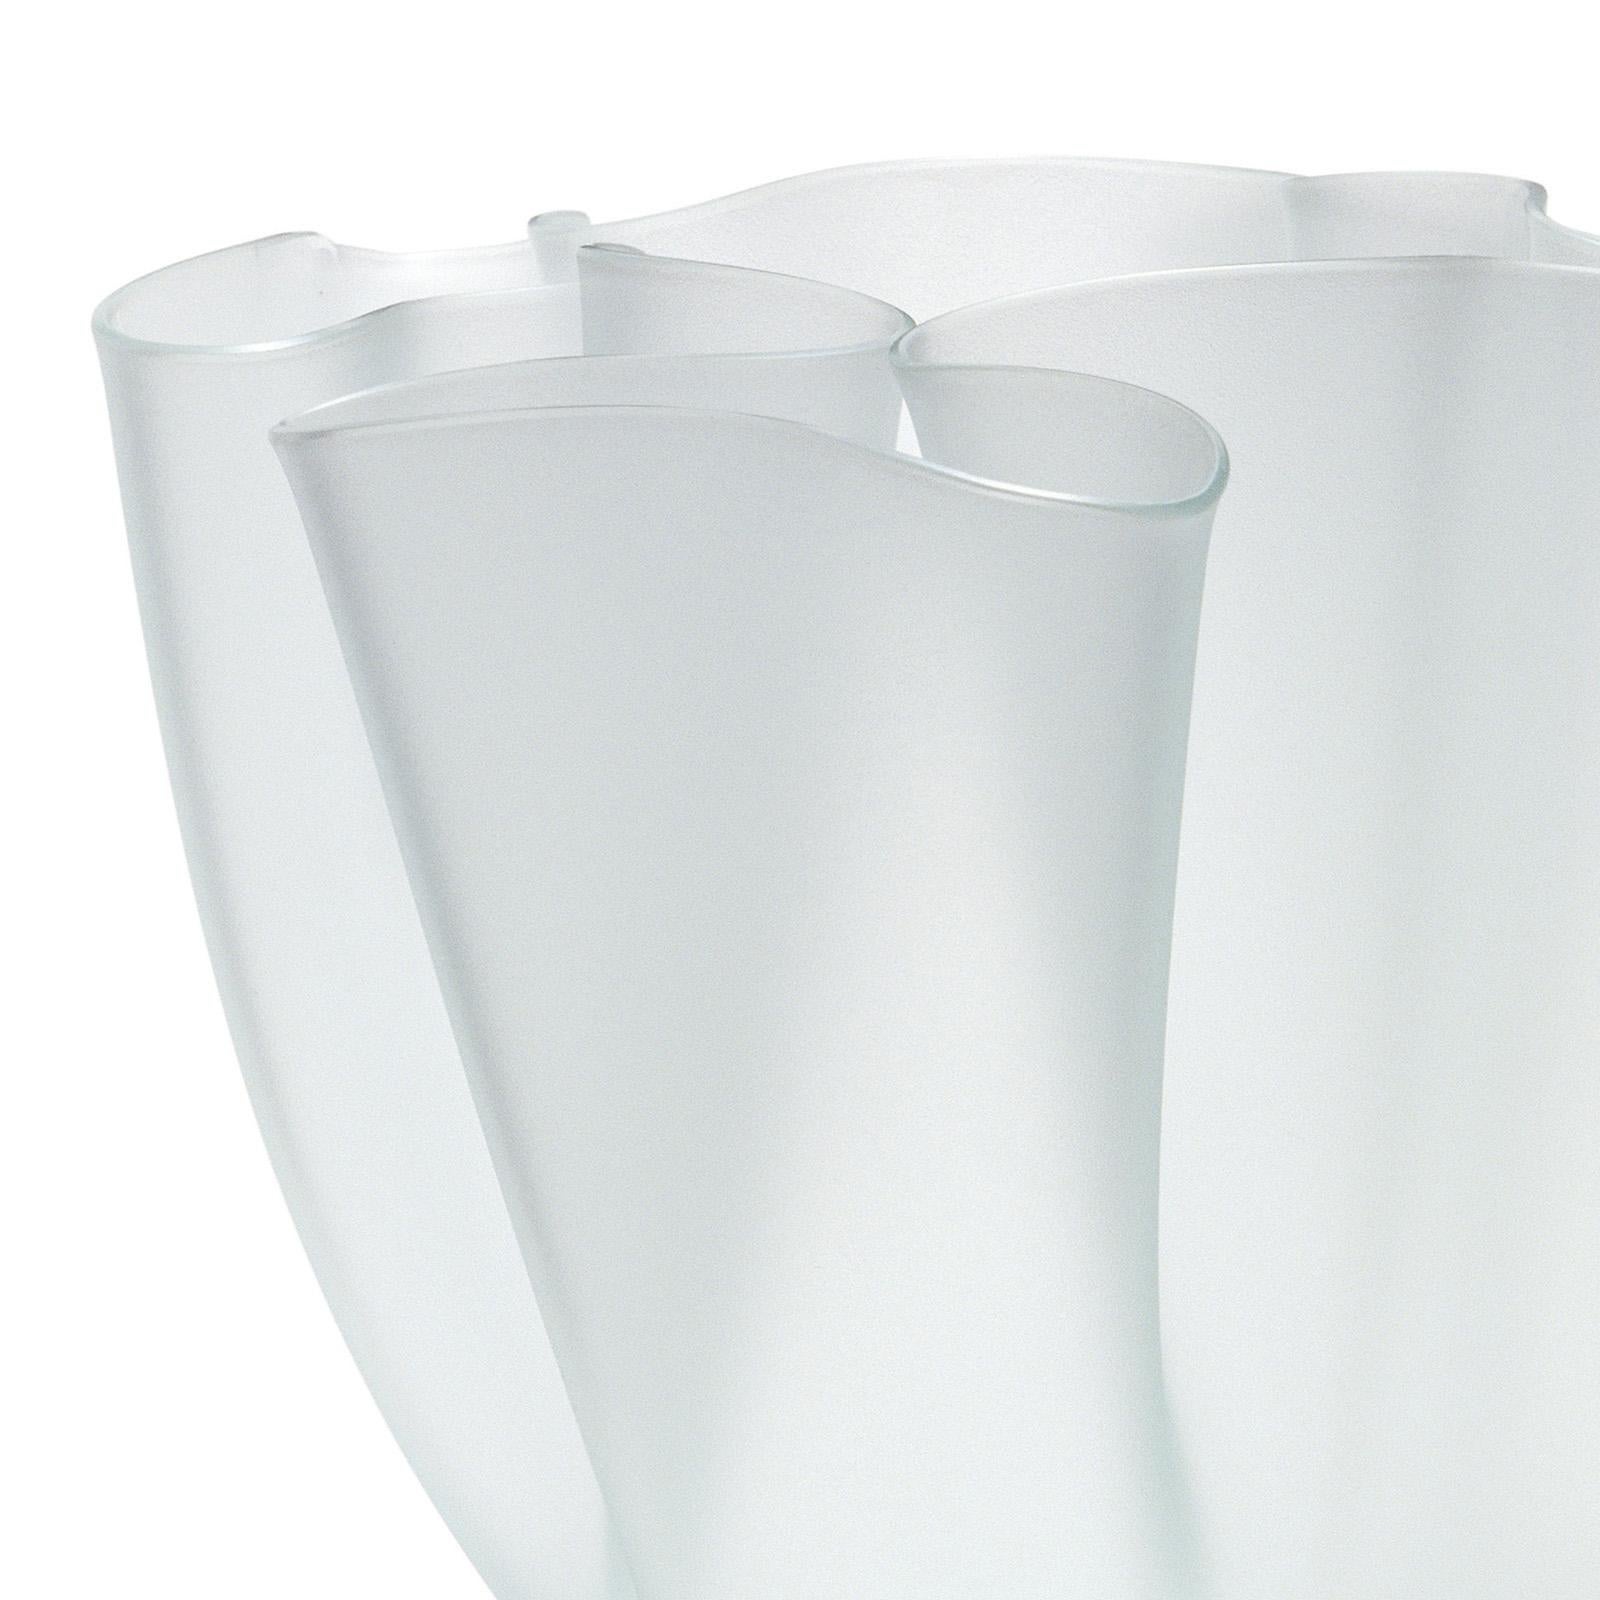 Vase flowering white in fused opal
white glass, 5mm thickness.
Also available in blue finish.